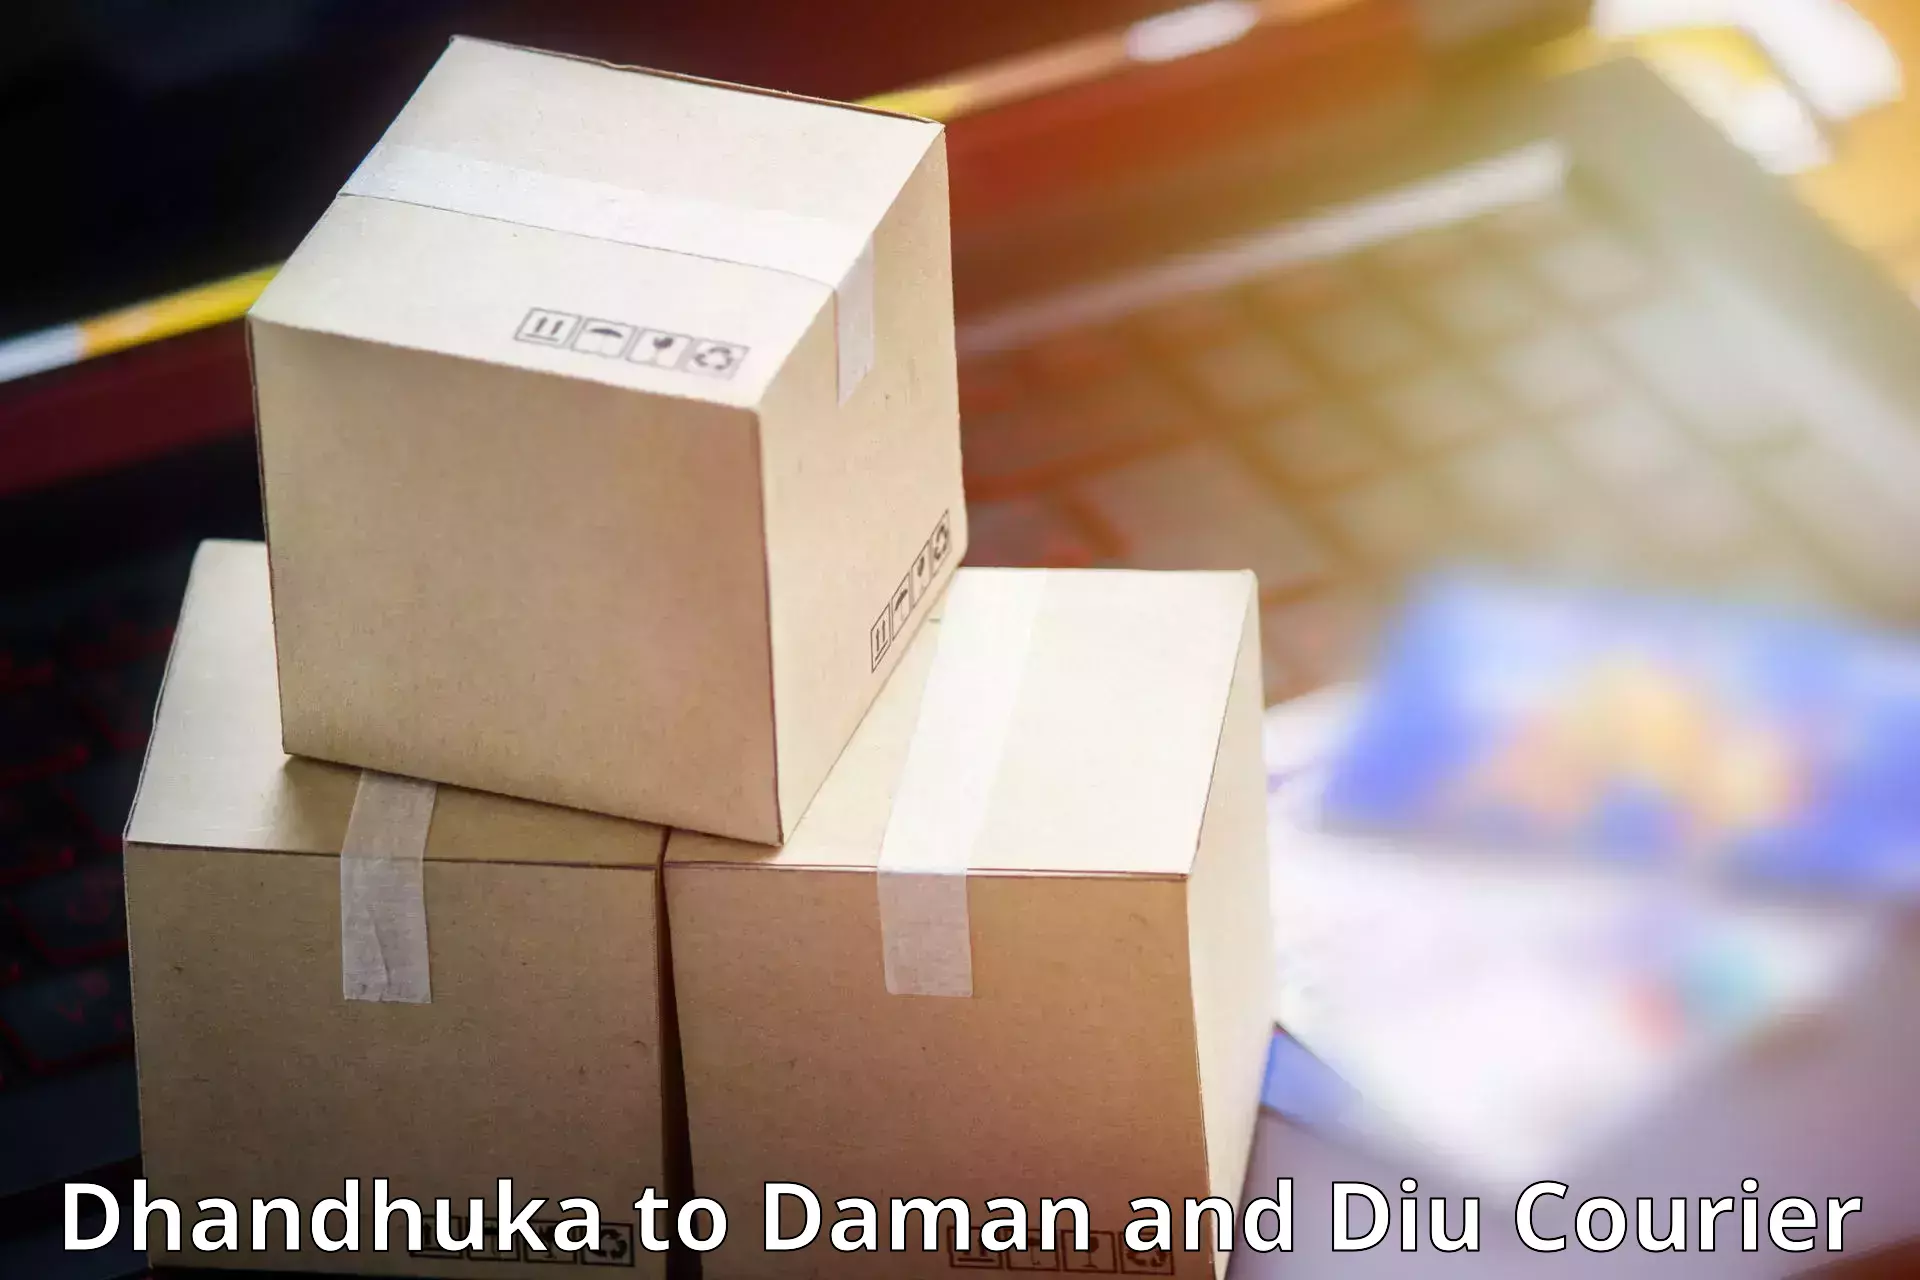 Premium courier solutions Dhandhuka to Diu